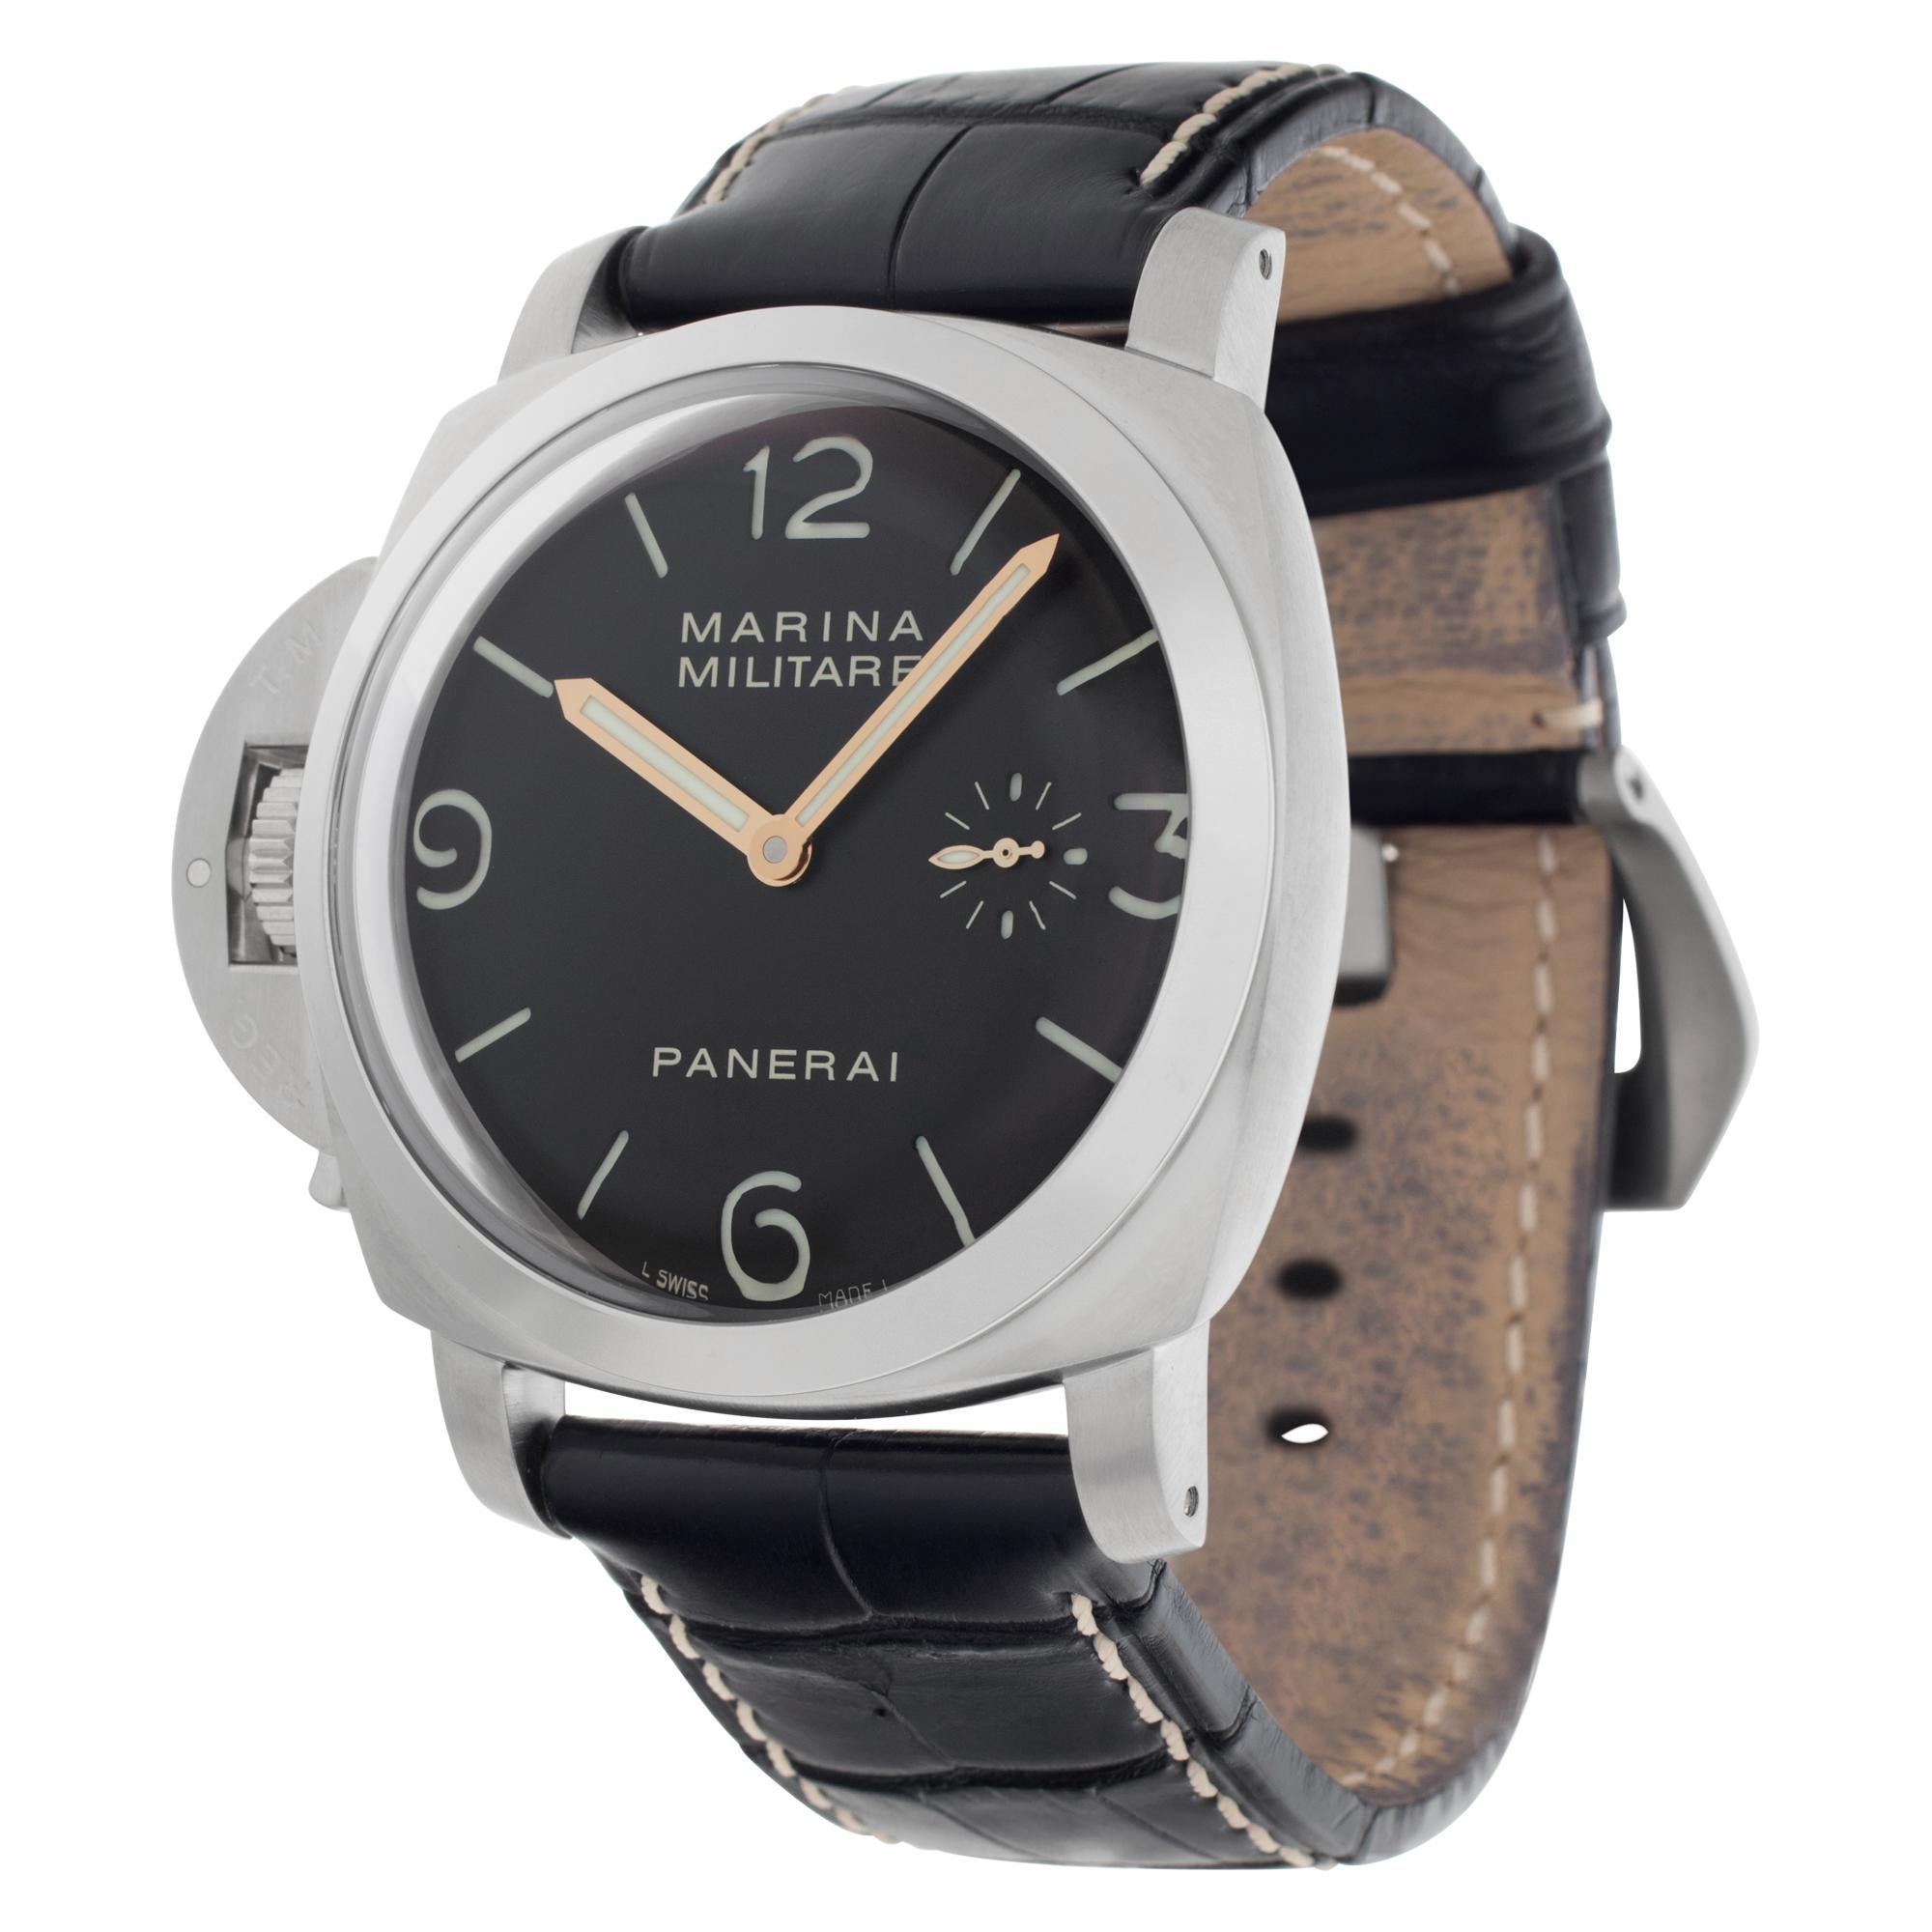 Limited Edition Panerai Marina Militare Lefty in stainless steel on leather strap with tang buckle. Manual w/ subseconds. With extra leather strap booklets, box, certifcates and papers. 47 mm case size. Ref PAM217. Fine Pre-owned Panerai